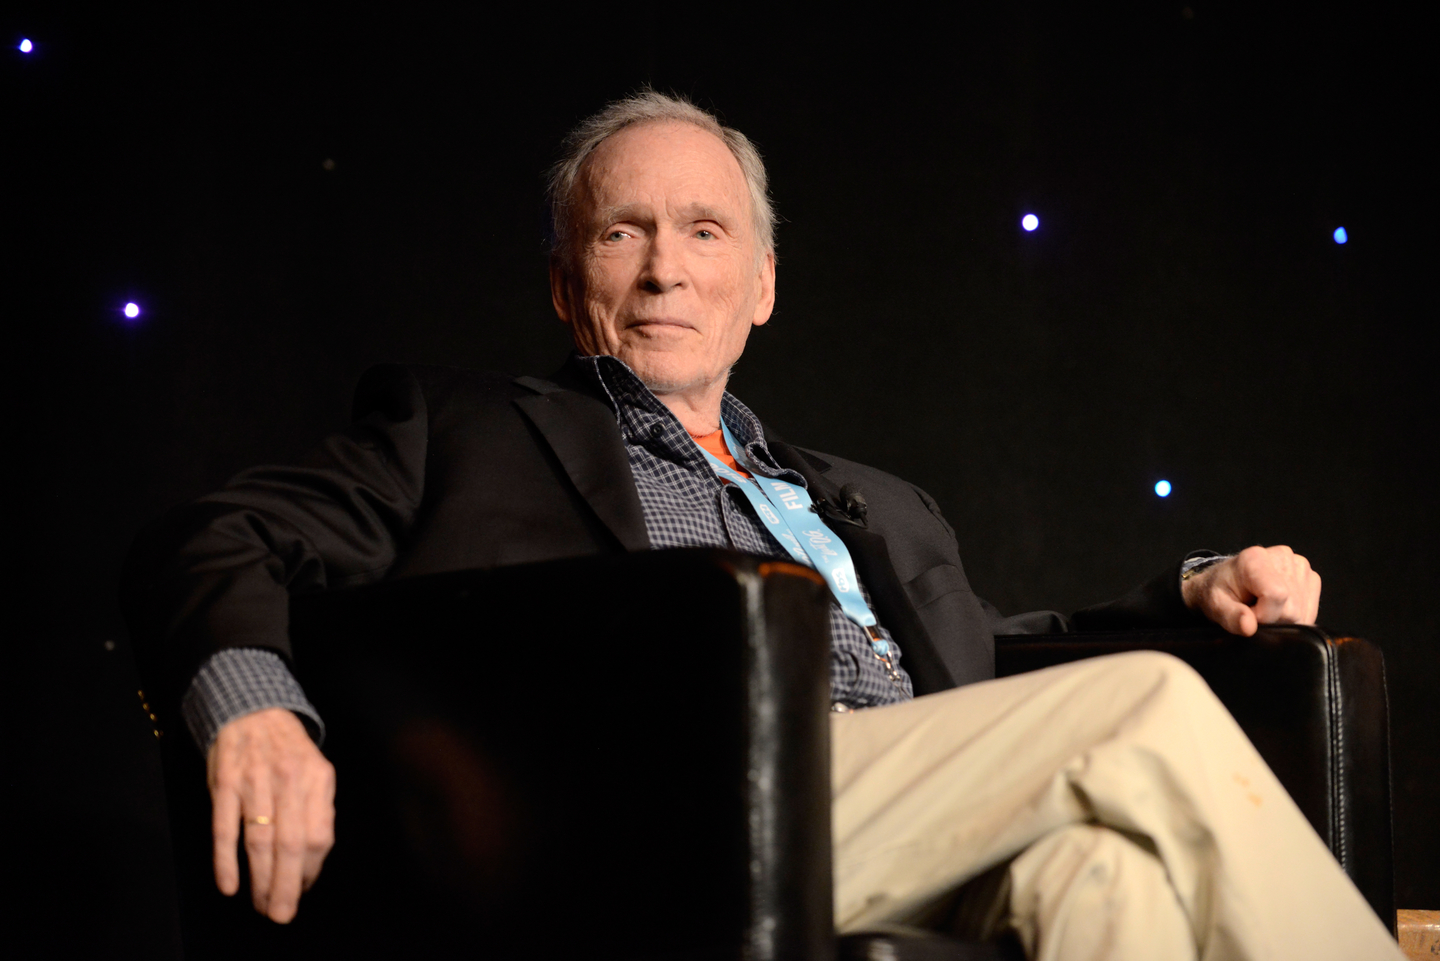 Legendary television personality Dick Cavett was on-hand for SXSW Comedy’s “Cavett on Comedy with Dave Hill.”